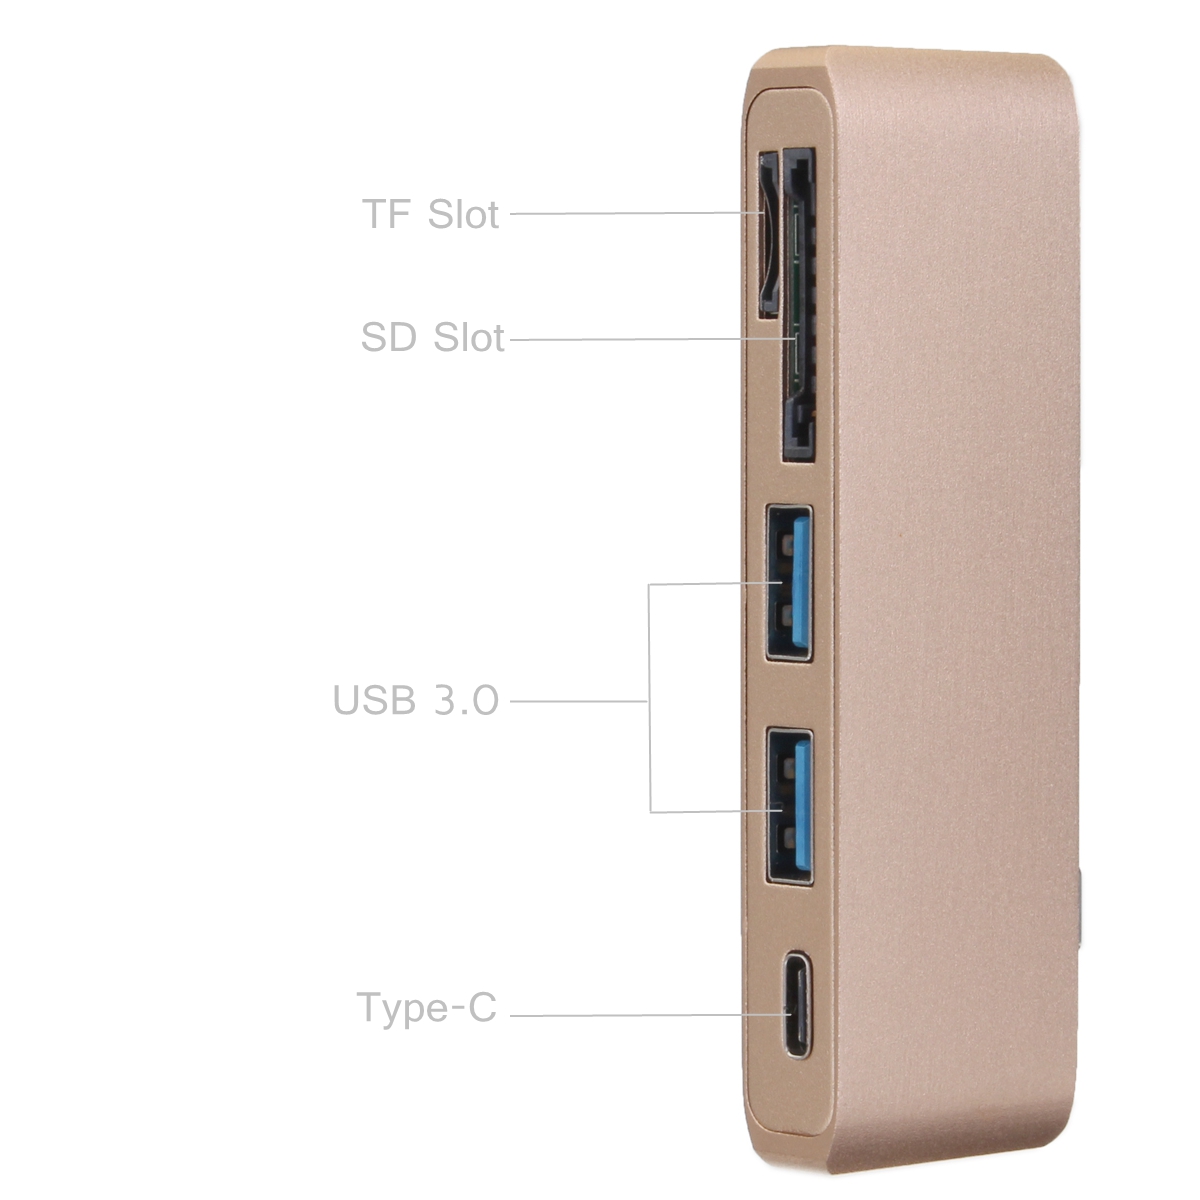 Multifunction USB Hub Type-C to Type-C USB 3.0 2Ports TF SD Card Reader for Laptop PC 66